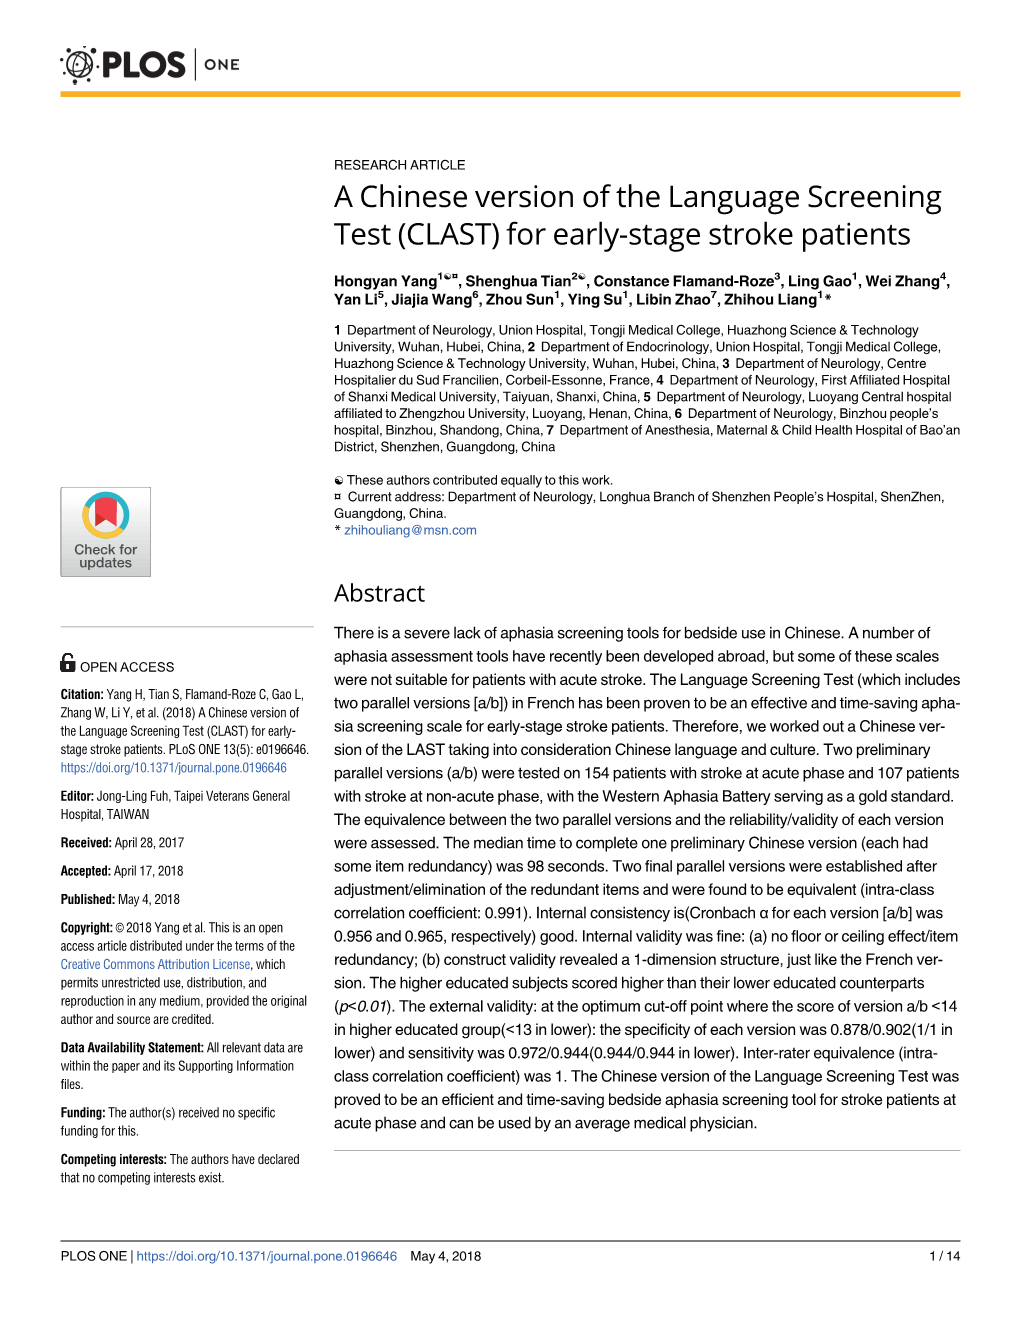 A Chinese Version of the Language Screening Test (CLAST) for Early-Stage Stroke Patients